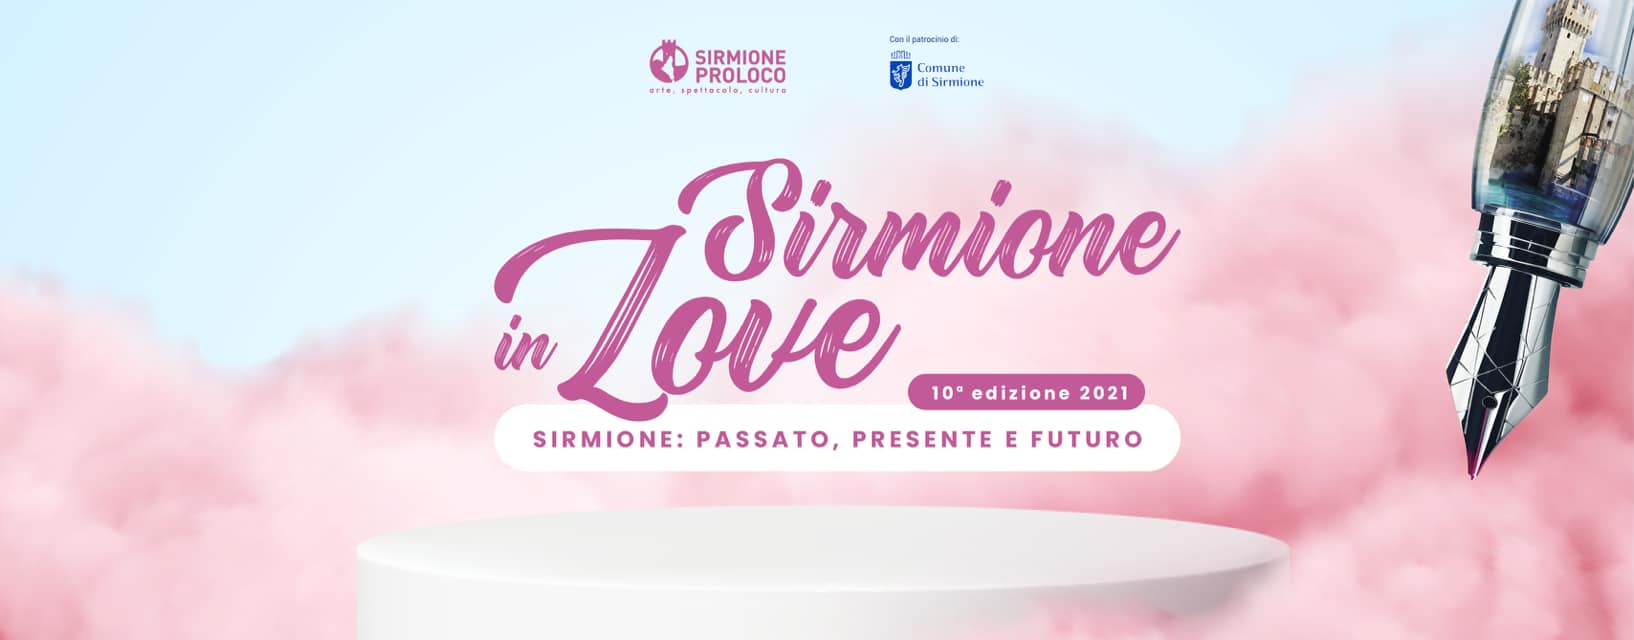 Sirmione in love 2021